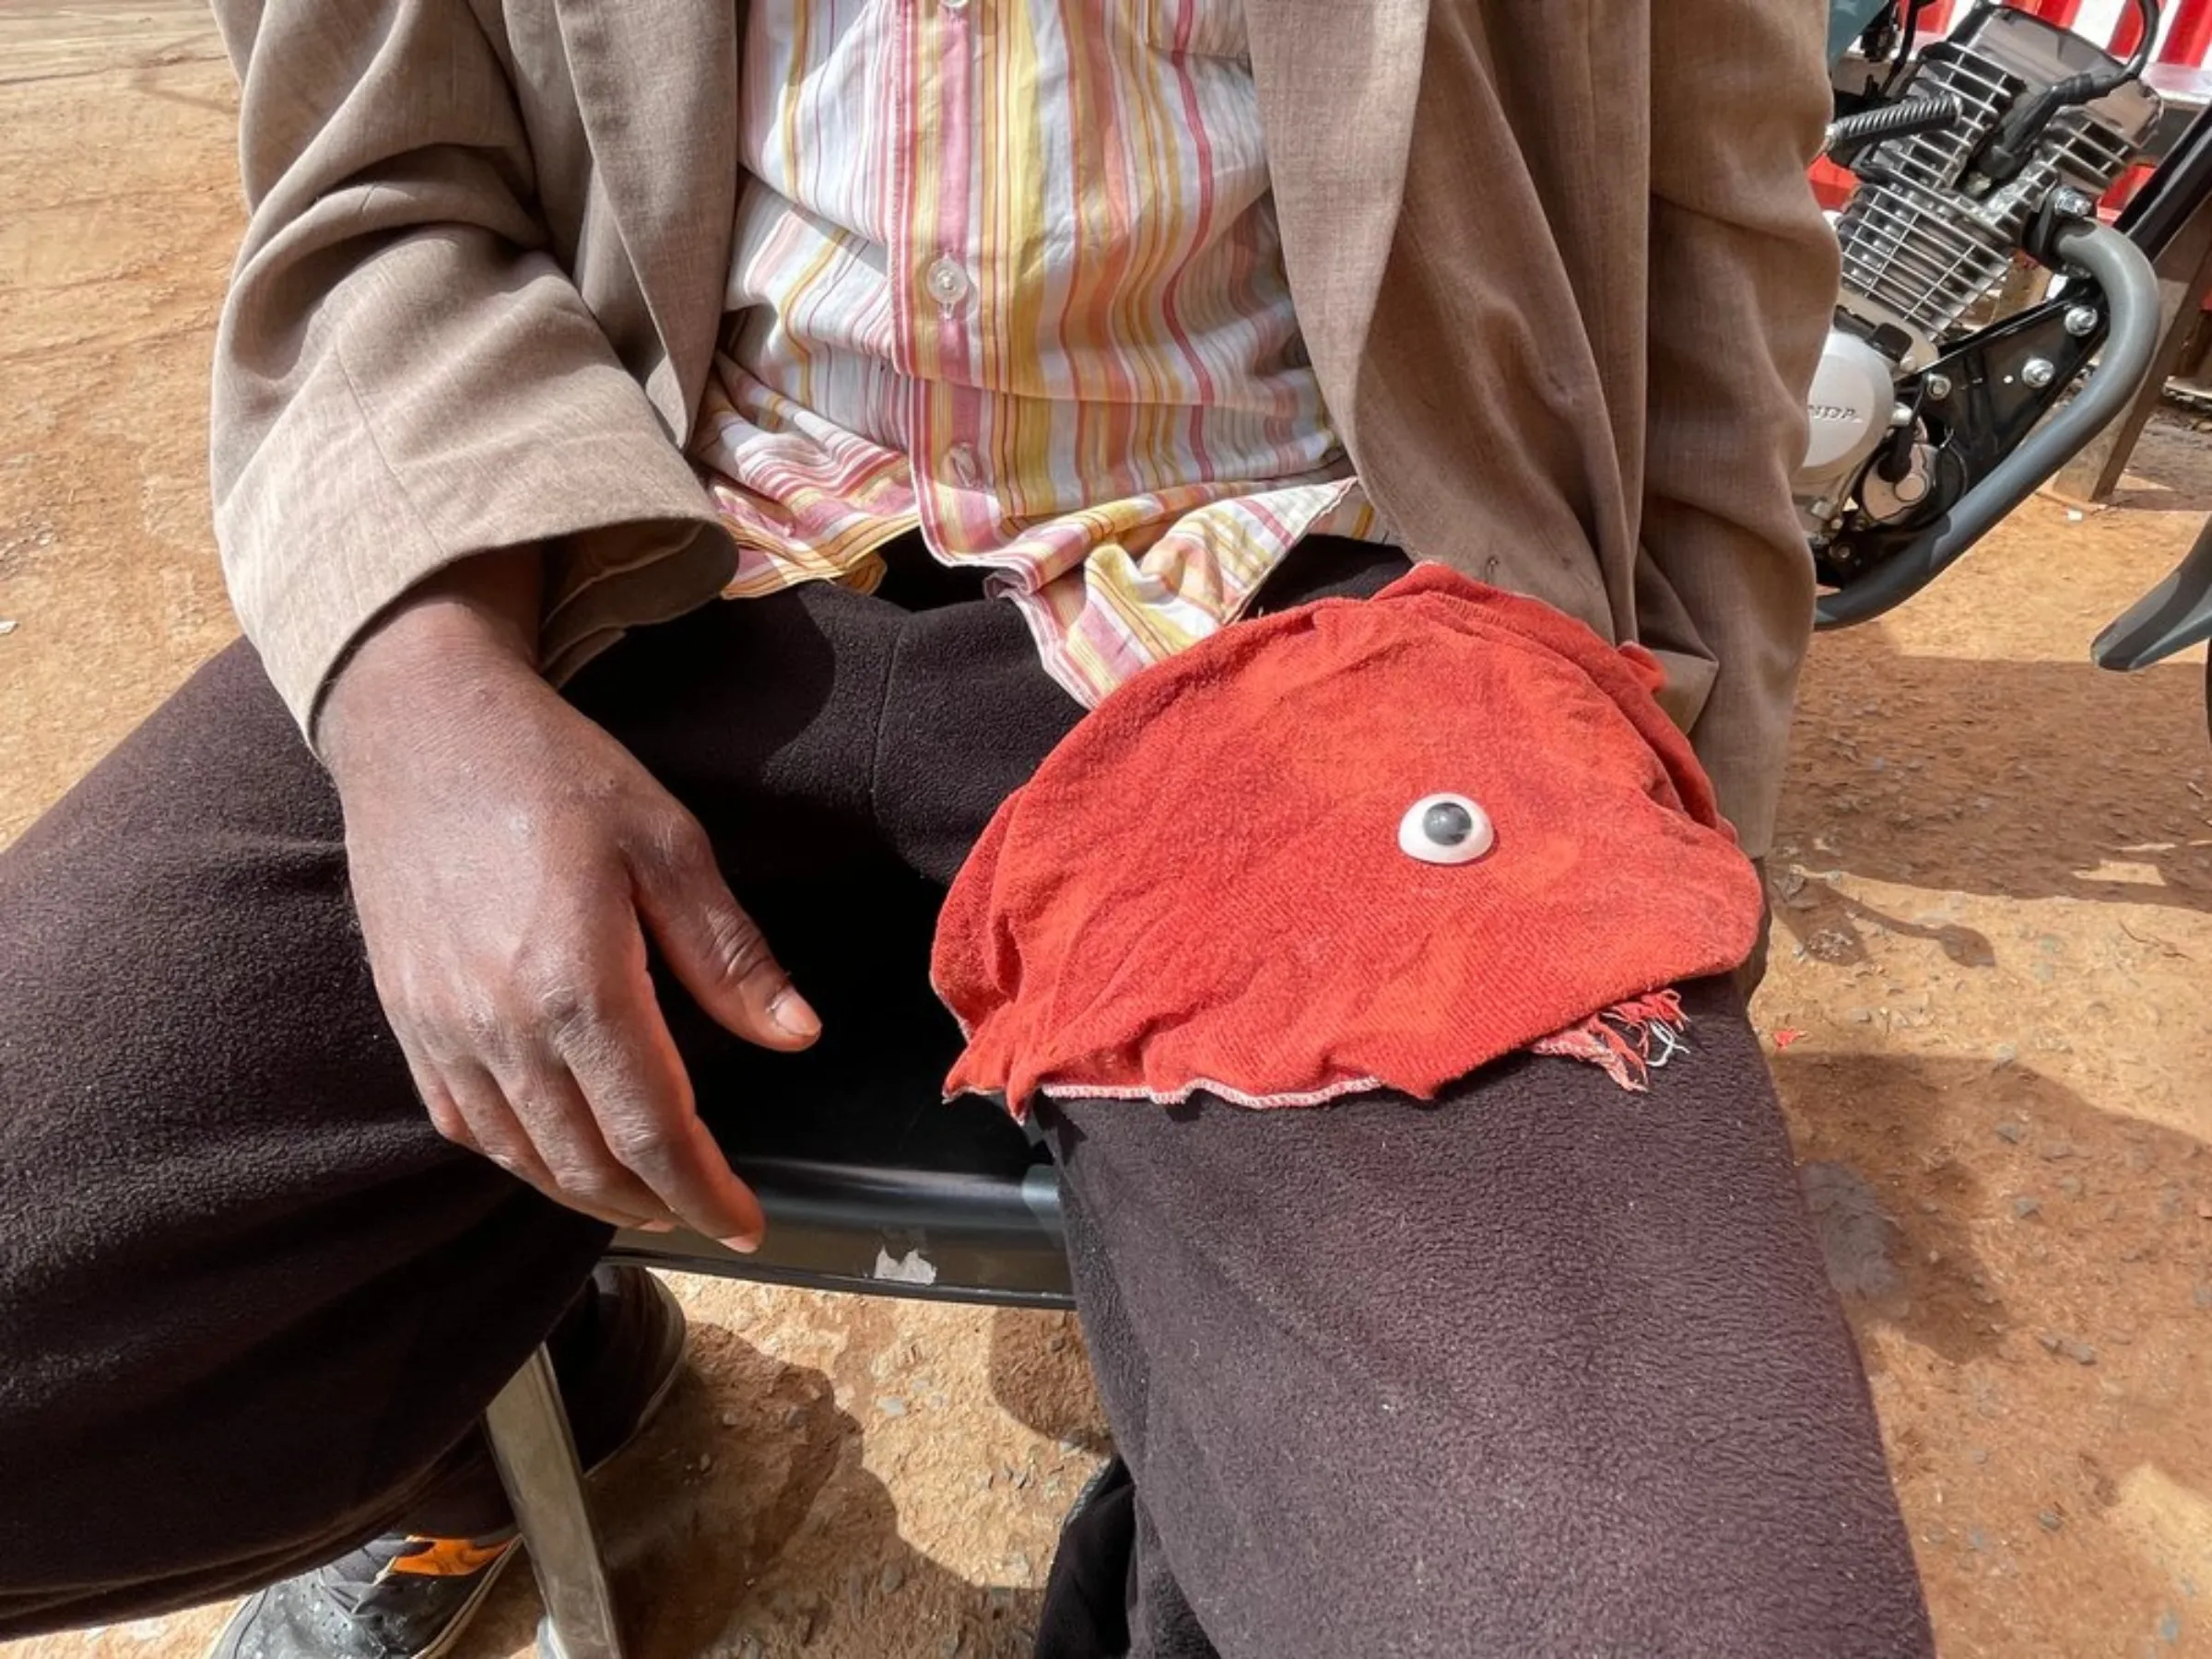 Former Uber Eats driver, Denis, places his synthetic eye on a cloth on his lap in a food courier commune where he lives in the south of Johannesburg, South Africa. He lost his eye and parts of his long-term memory after he was hit while driving for Uber and had to spend months recovering in hospital. "The other drivers help feed and clothe me," said Denis. March 22, 2021. Thomson Reuters Foundation/Kim Harrisberg